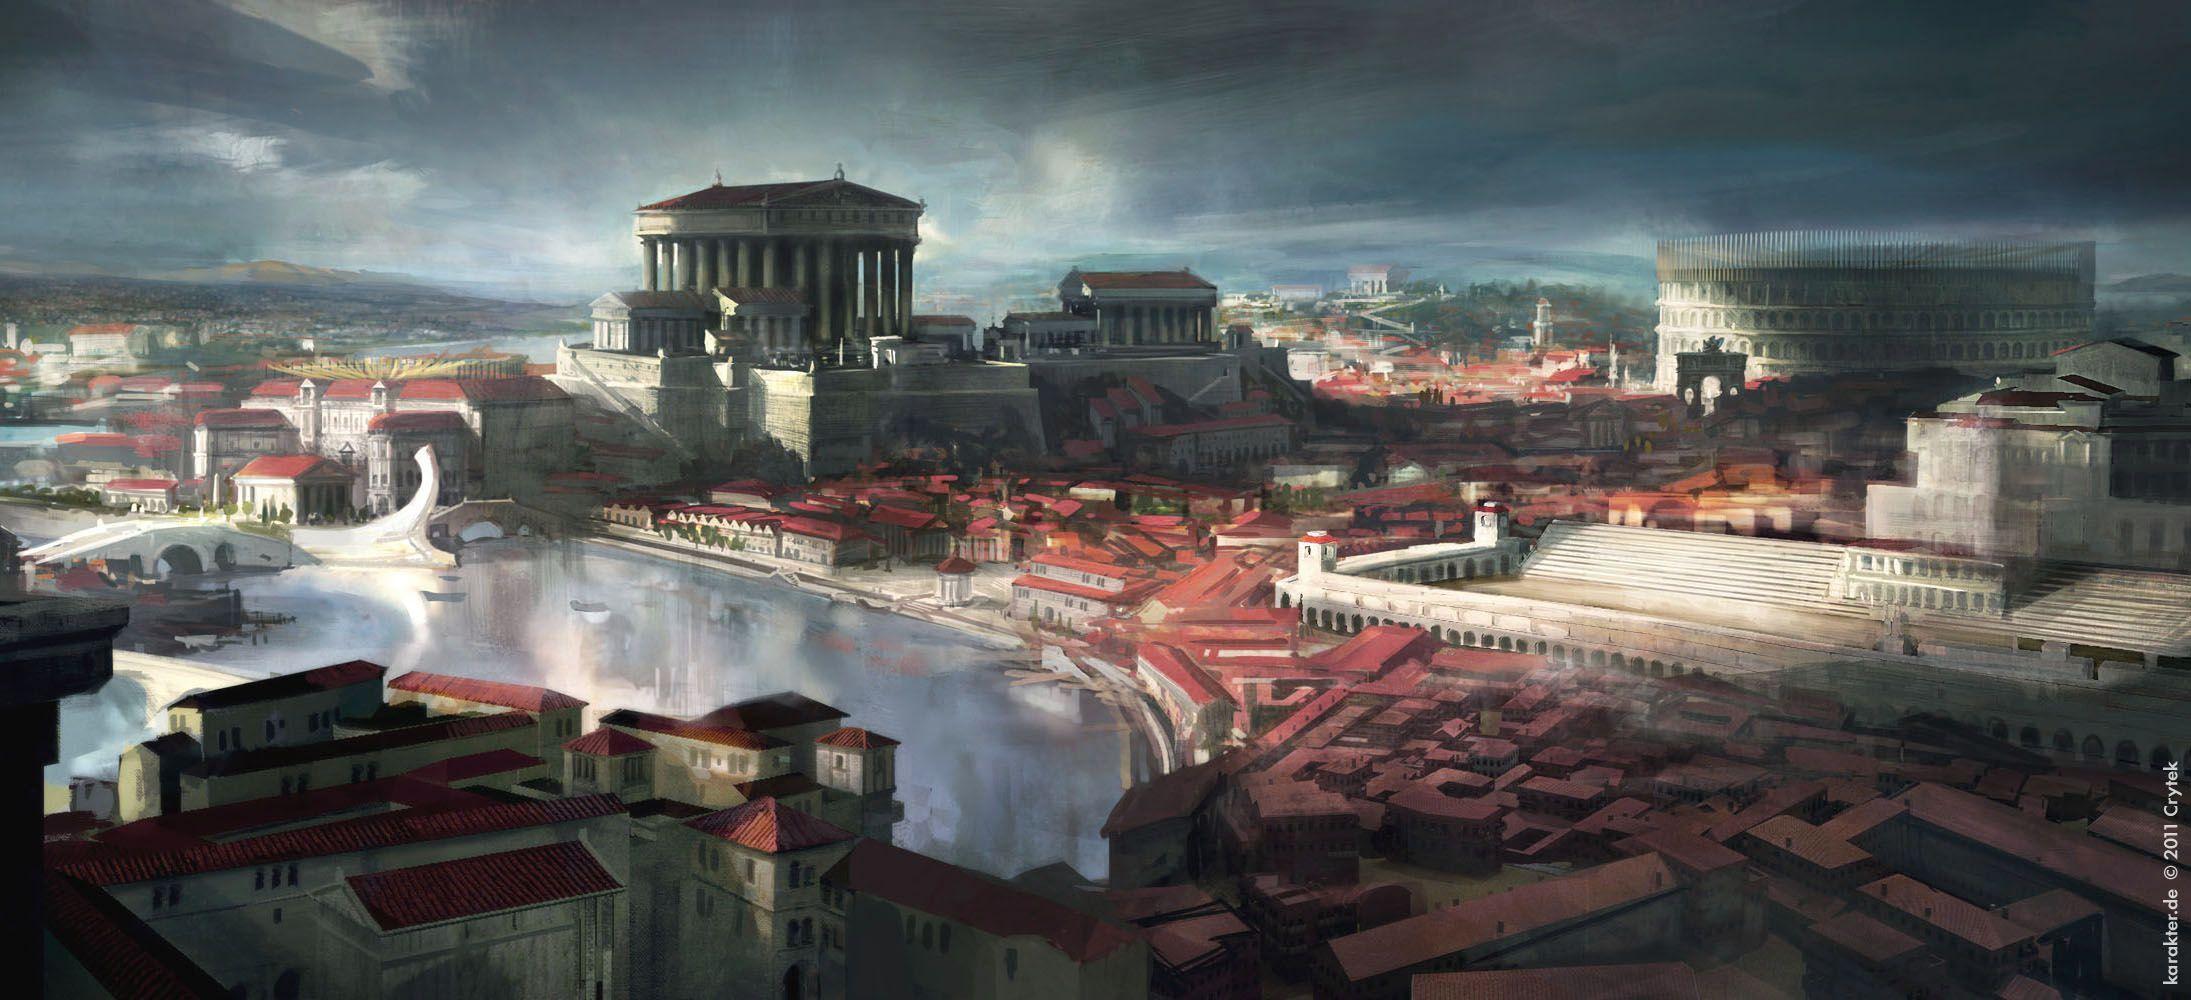 Discover 73+ ancient rome wallpaper latest - in.cdgdbentre